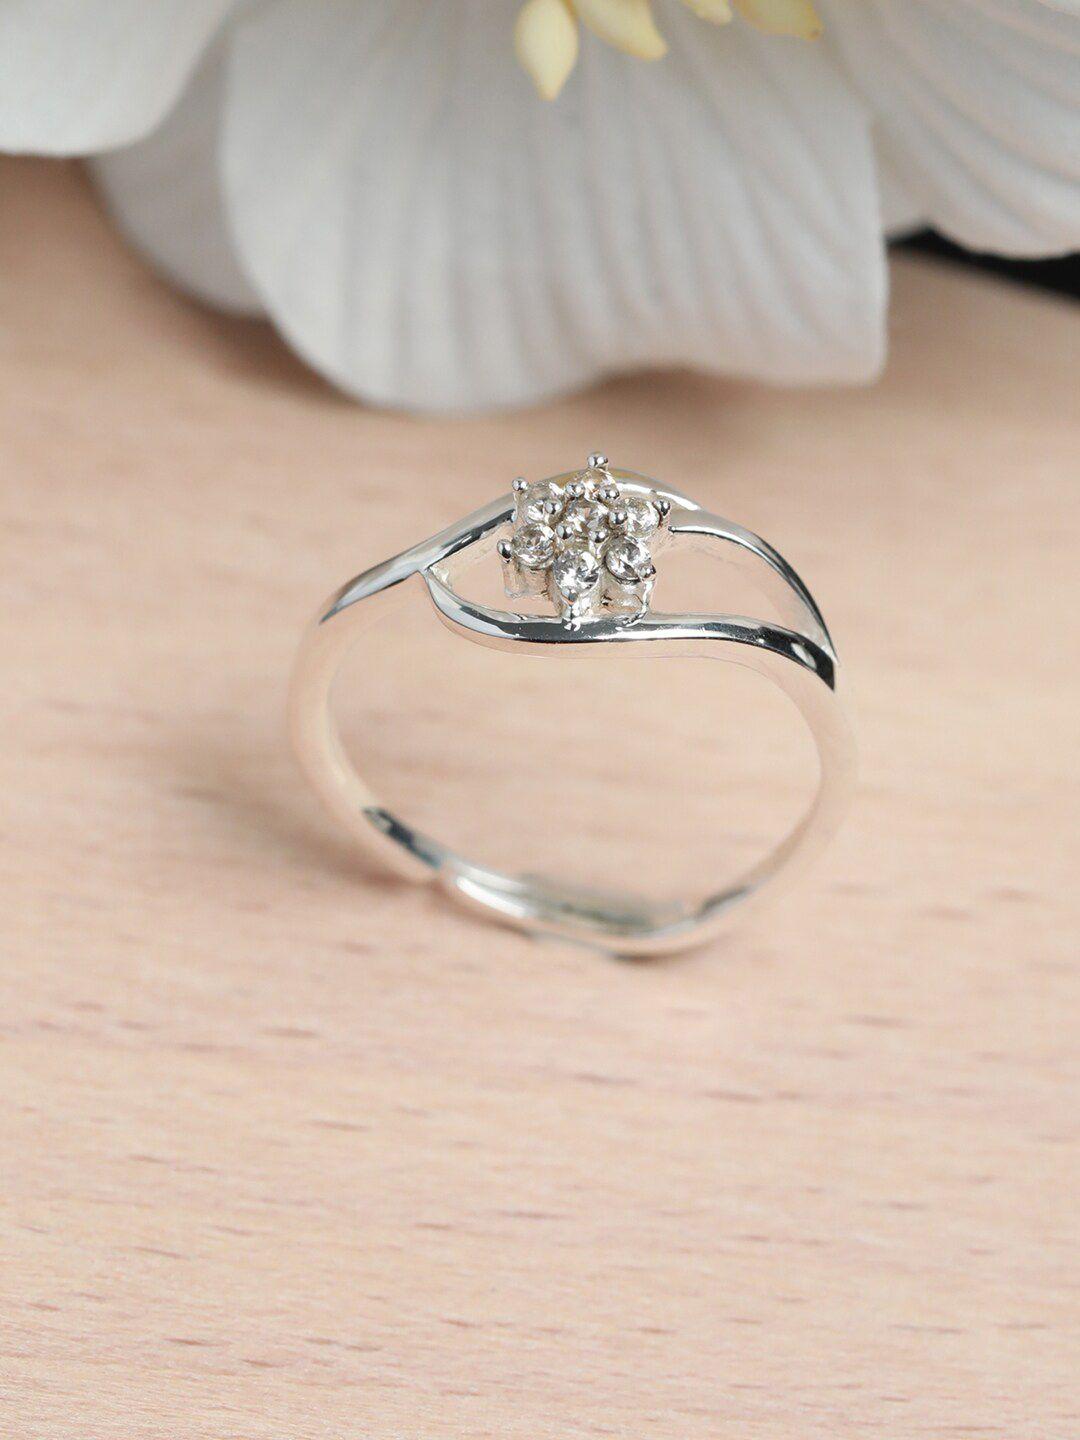 sheer by priyaasi 92.5 sterling silver white cz-studded finger ring